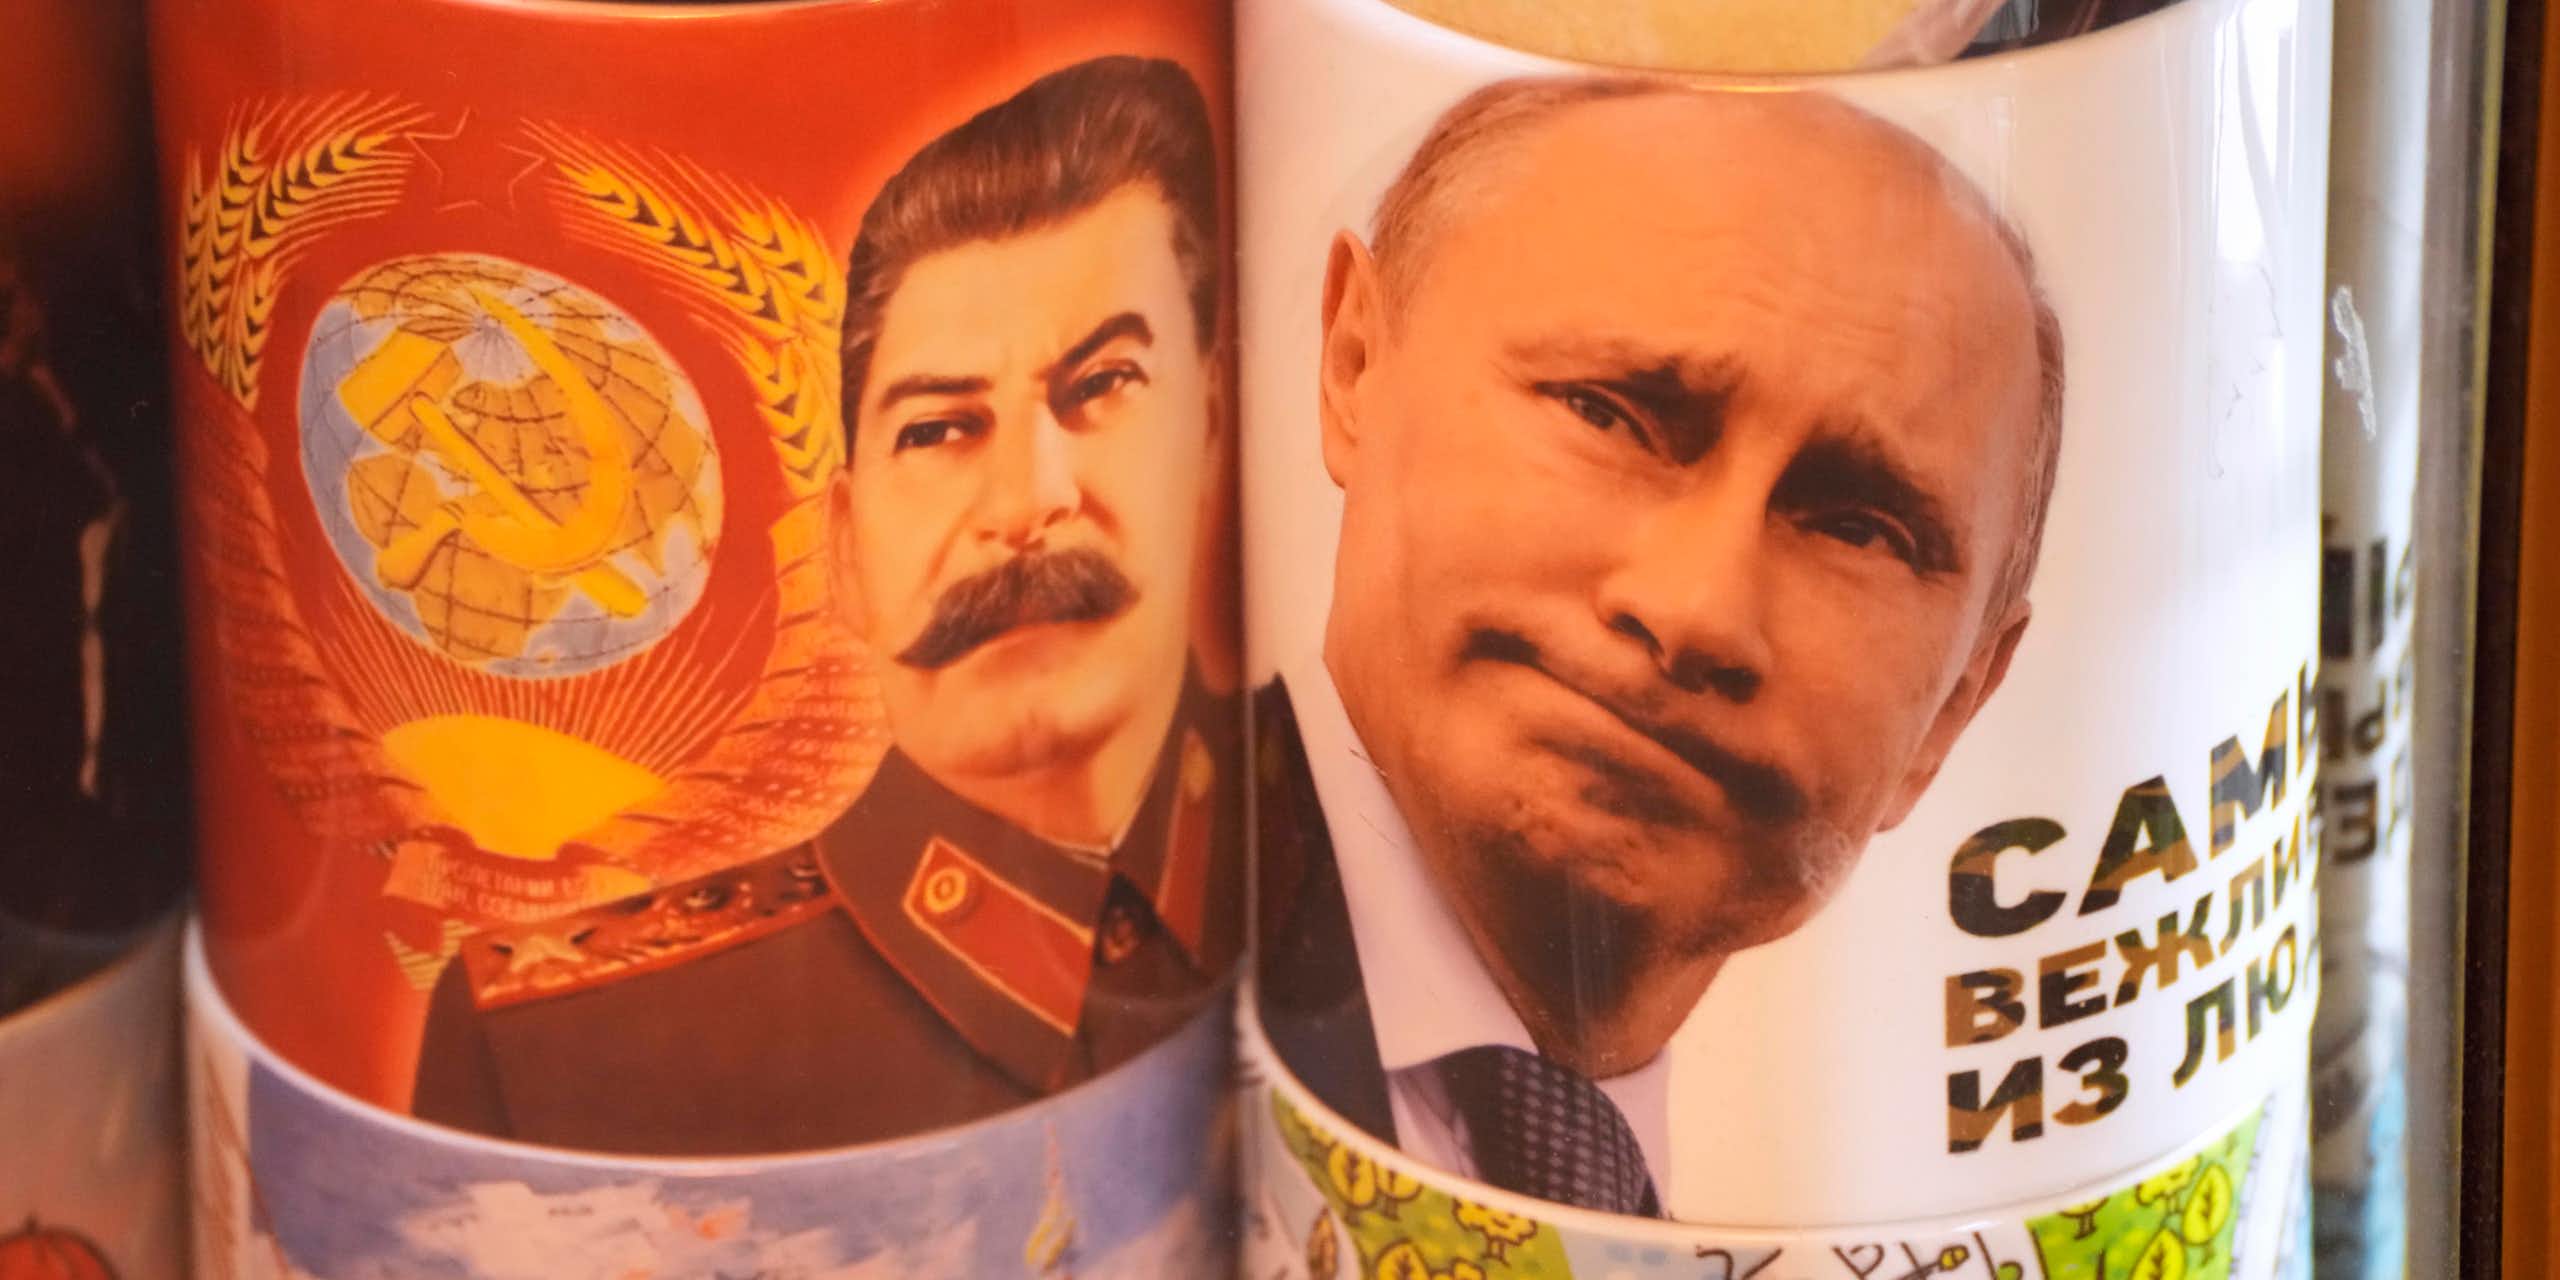 Two cups display the faces of Stalin and Putin.